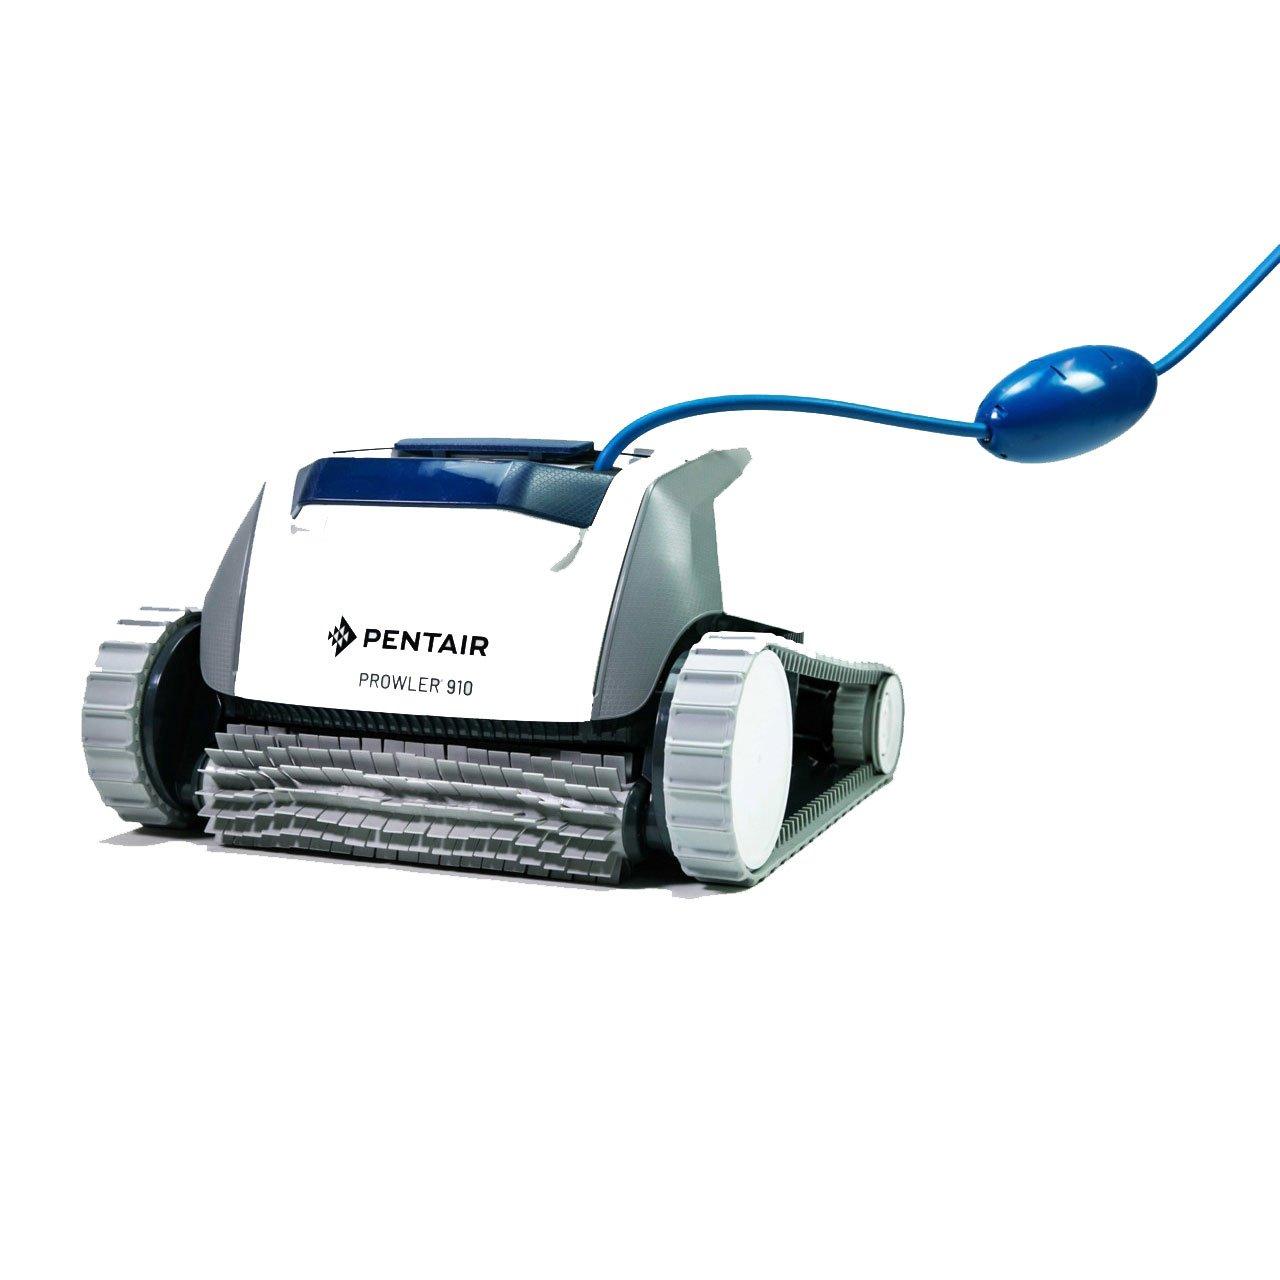 Pentair  Prowler 910 Aboveground Pool Cleaner